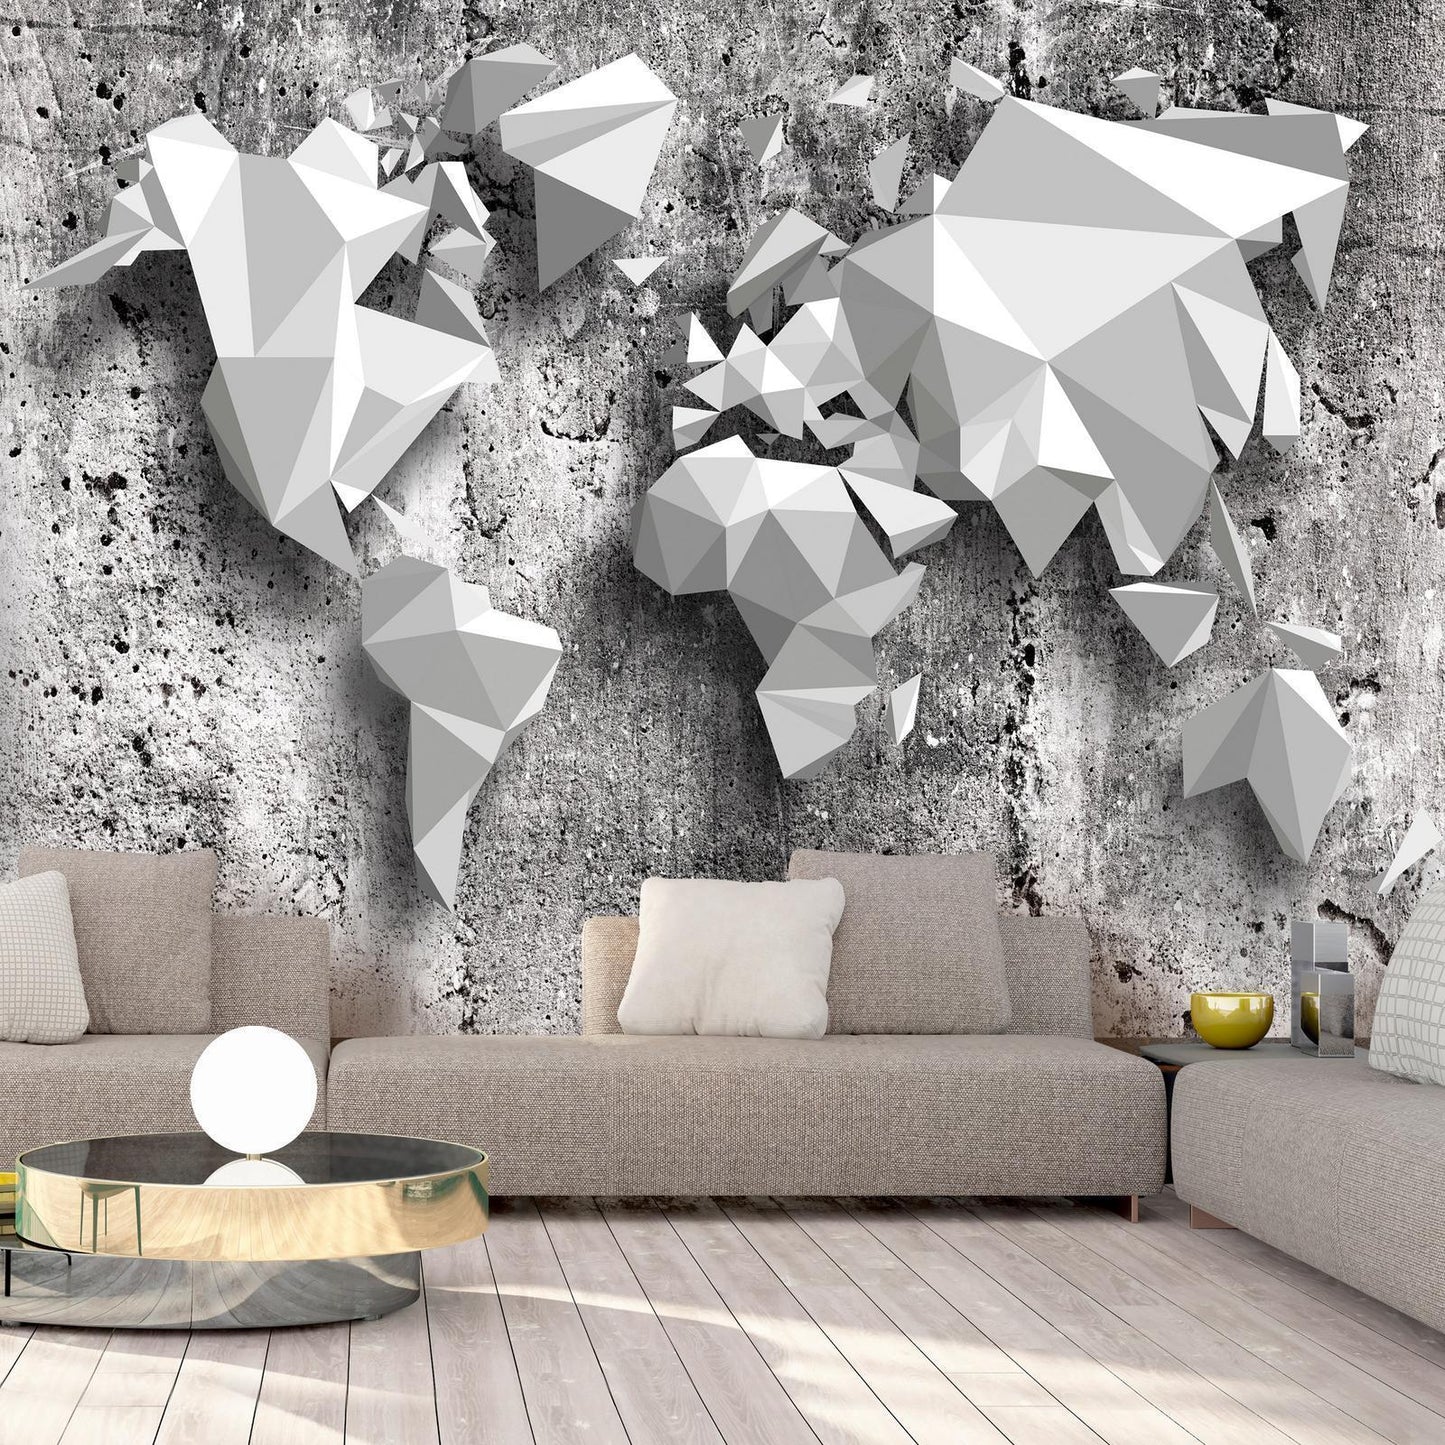 Wall Mural - World Map: Origami